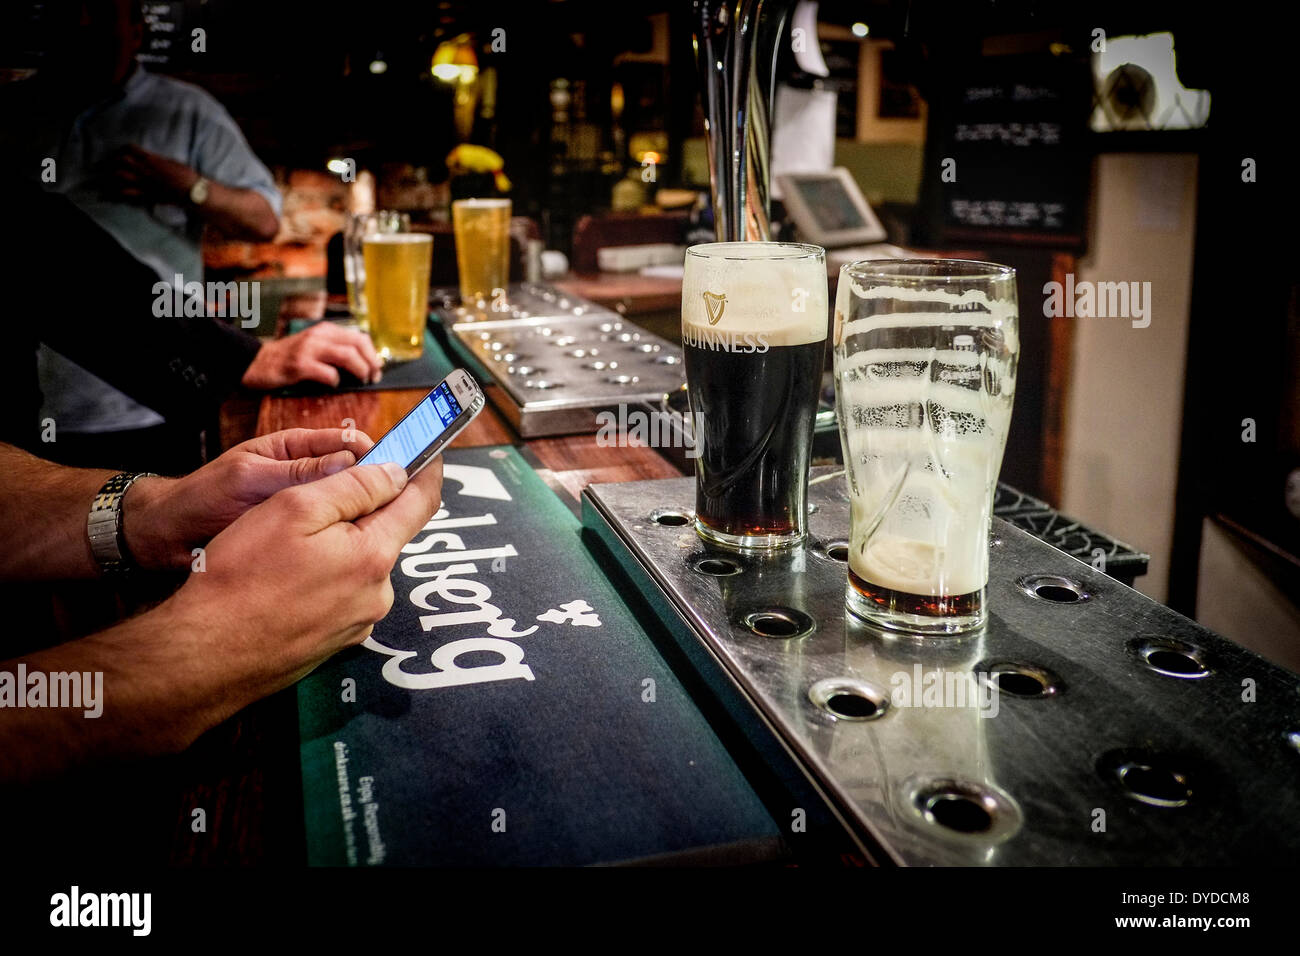 Pints of beer on the bar in a pub. Stock Photo